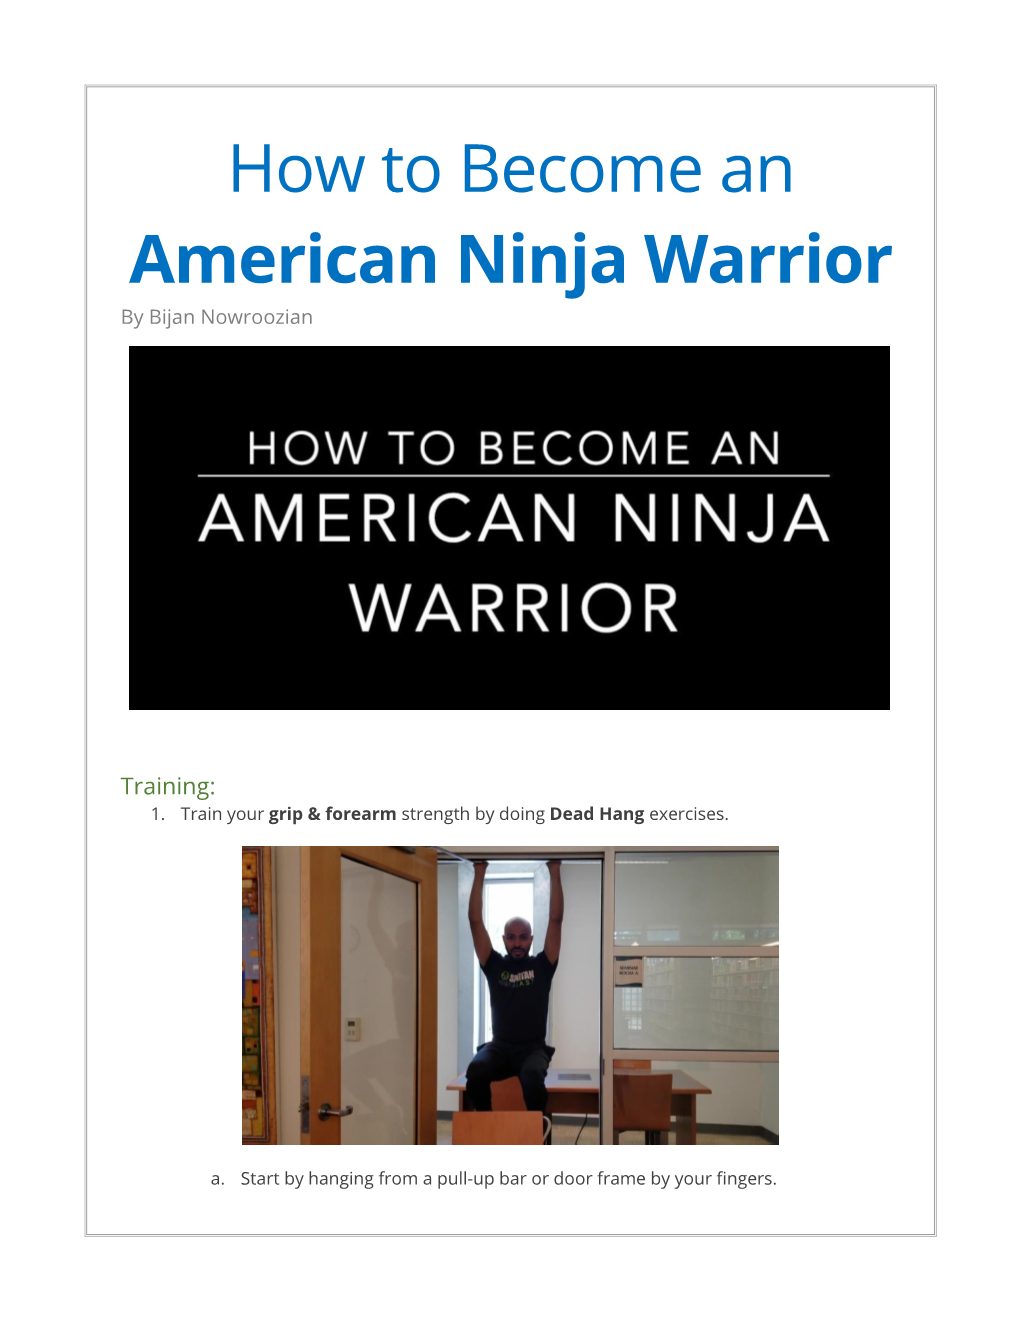 How to Become an American Ninja Warrior by Bijan Nowroozian